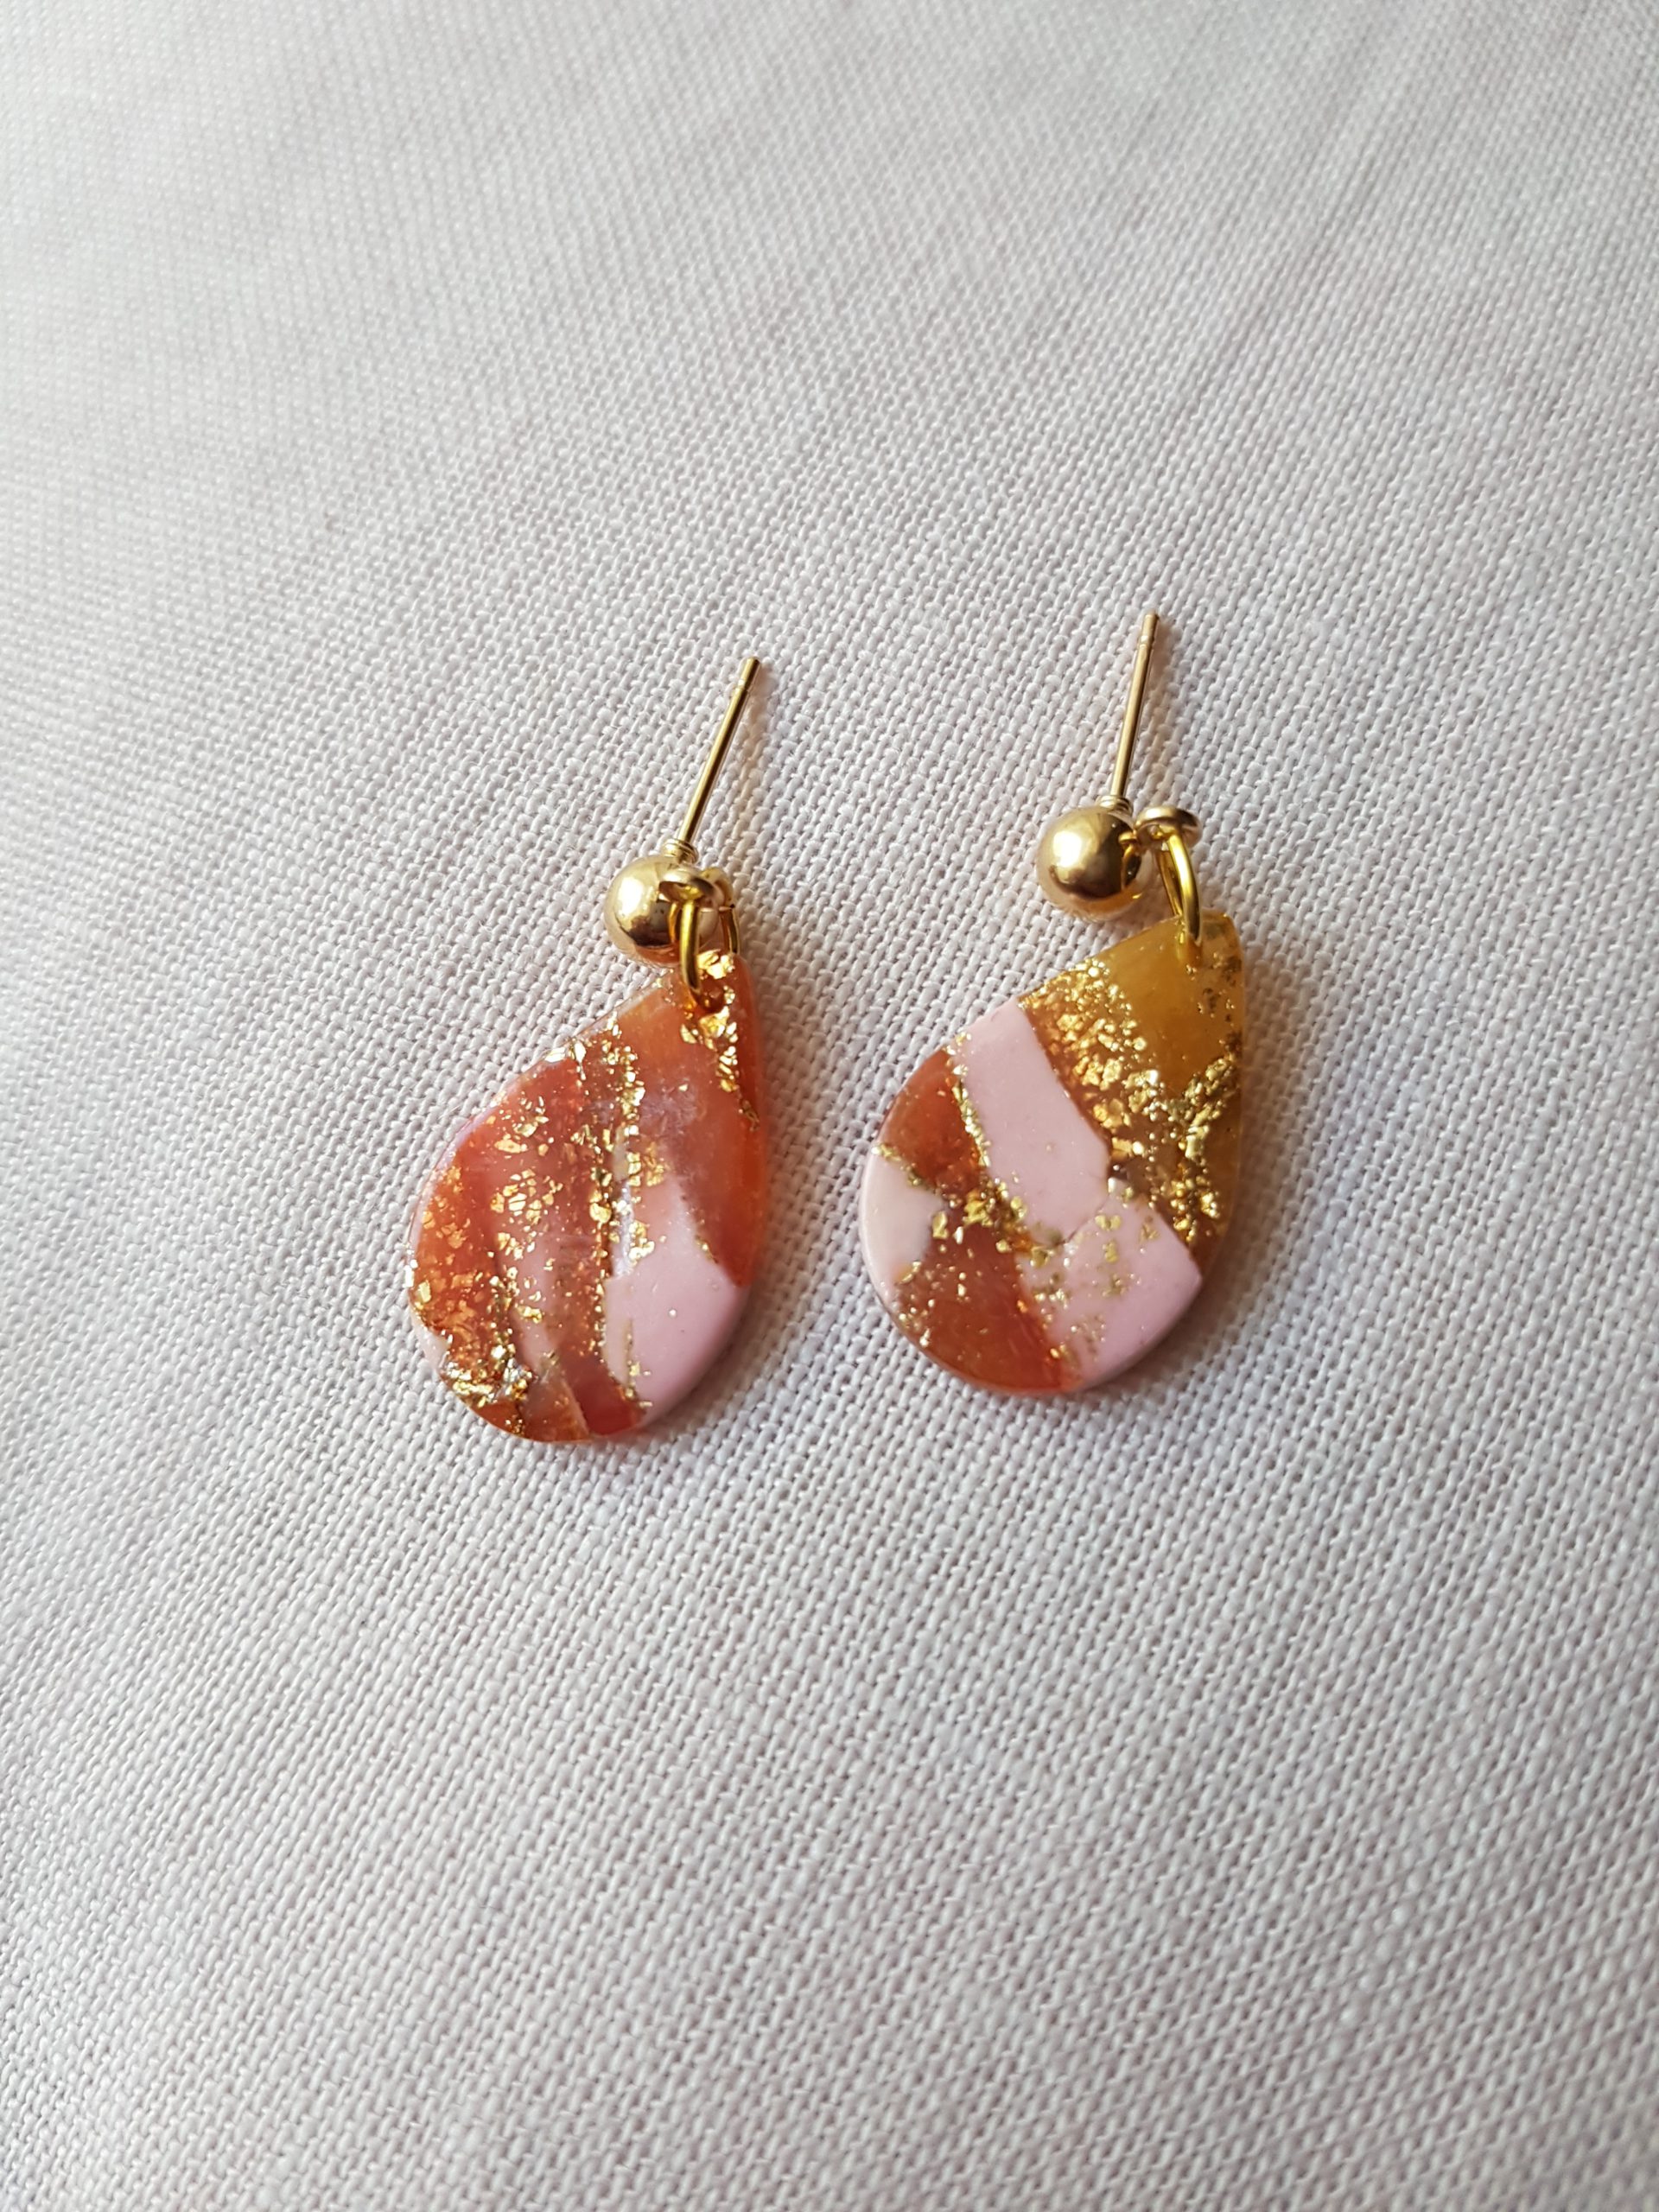 Cute Translucent Pink Earring Drops